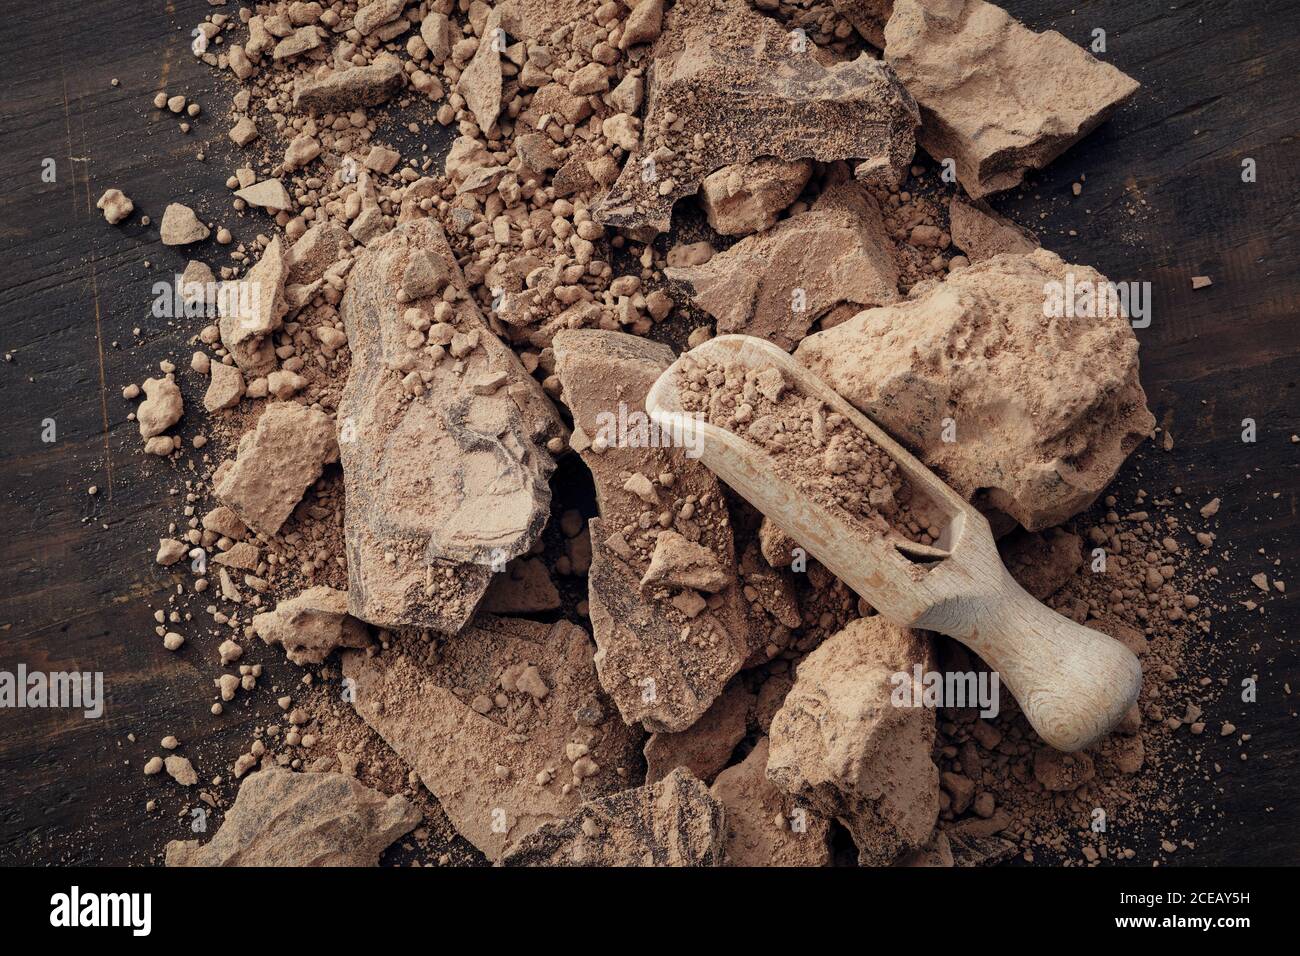 Pieces of grated cocoa. Natural chocolate lumps and wooden scoop, top view. Stock Photo